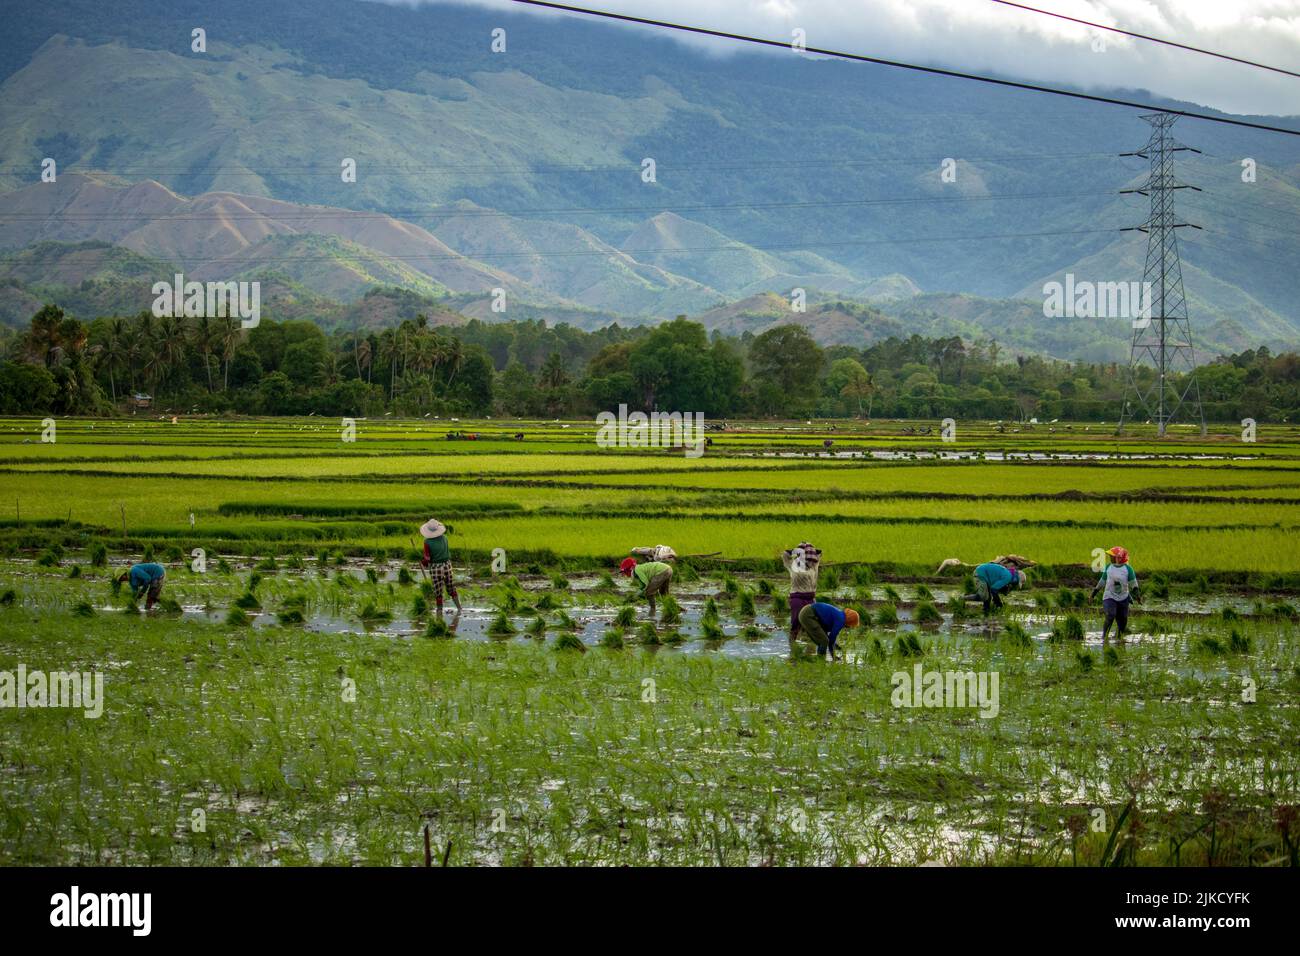 Photo of farmers planting rice, Aceh, Indonesia. Stock Photo